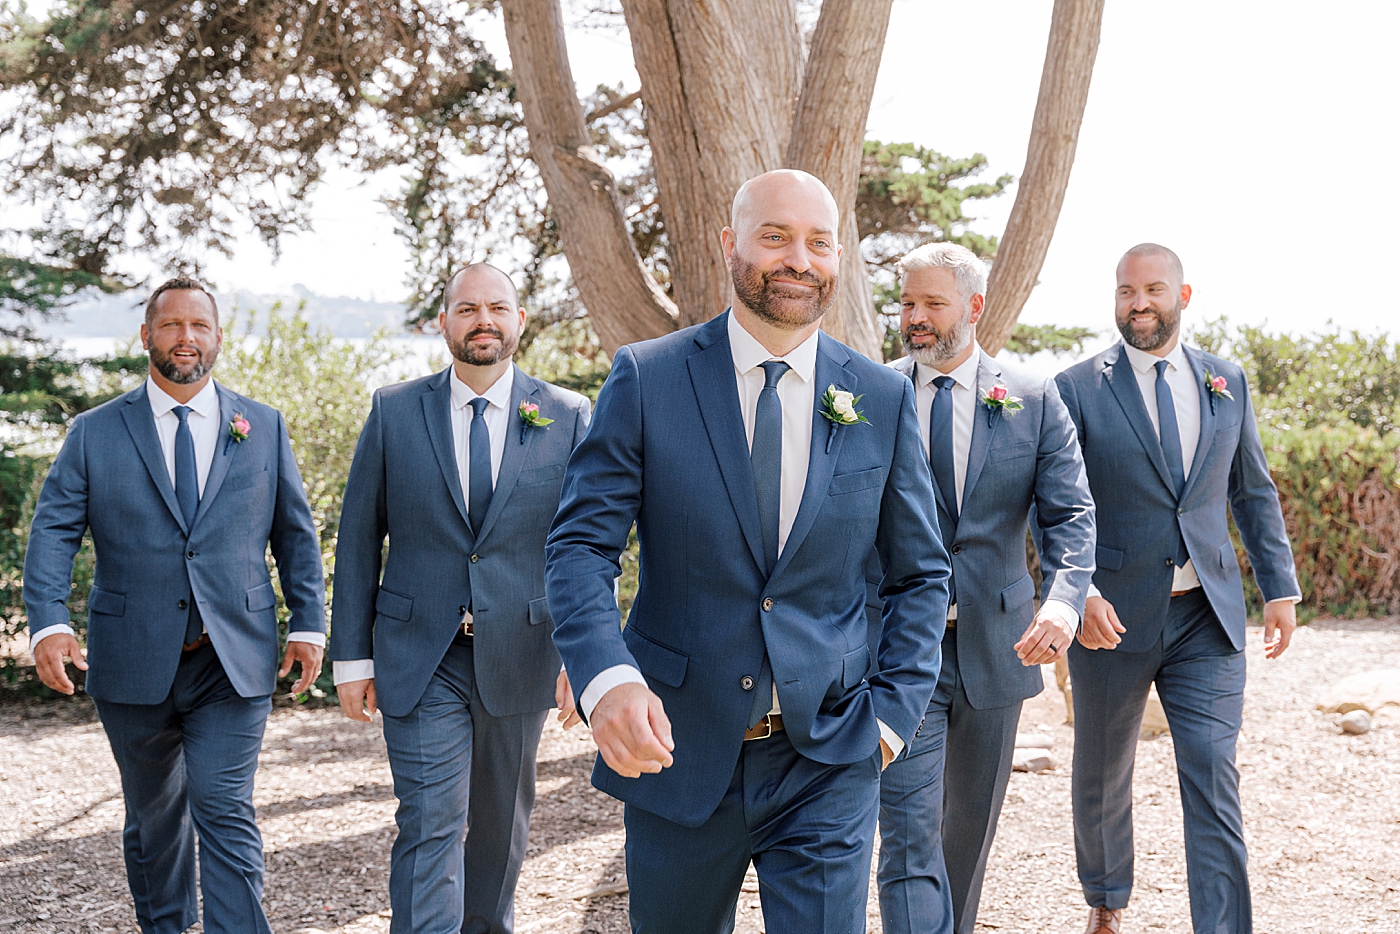 Groom and groomsmen in navy suits with one hand in a pocket walking towards the camera and smiling | Image by Hope Helmuth Photography